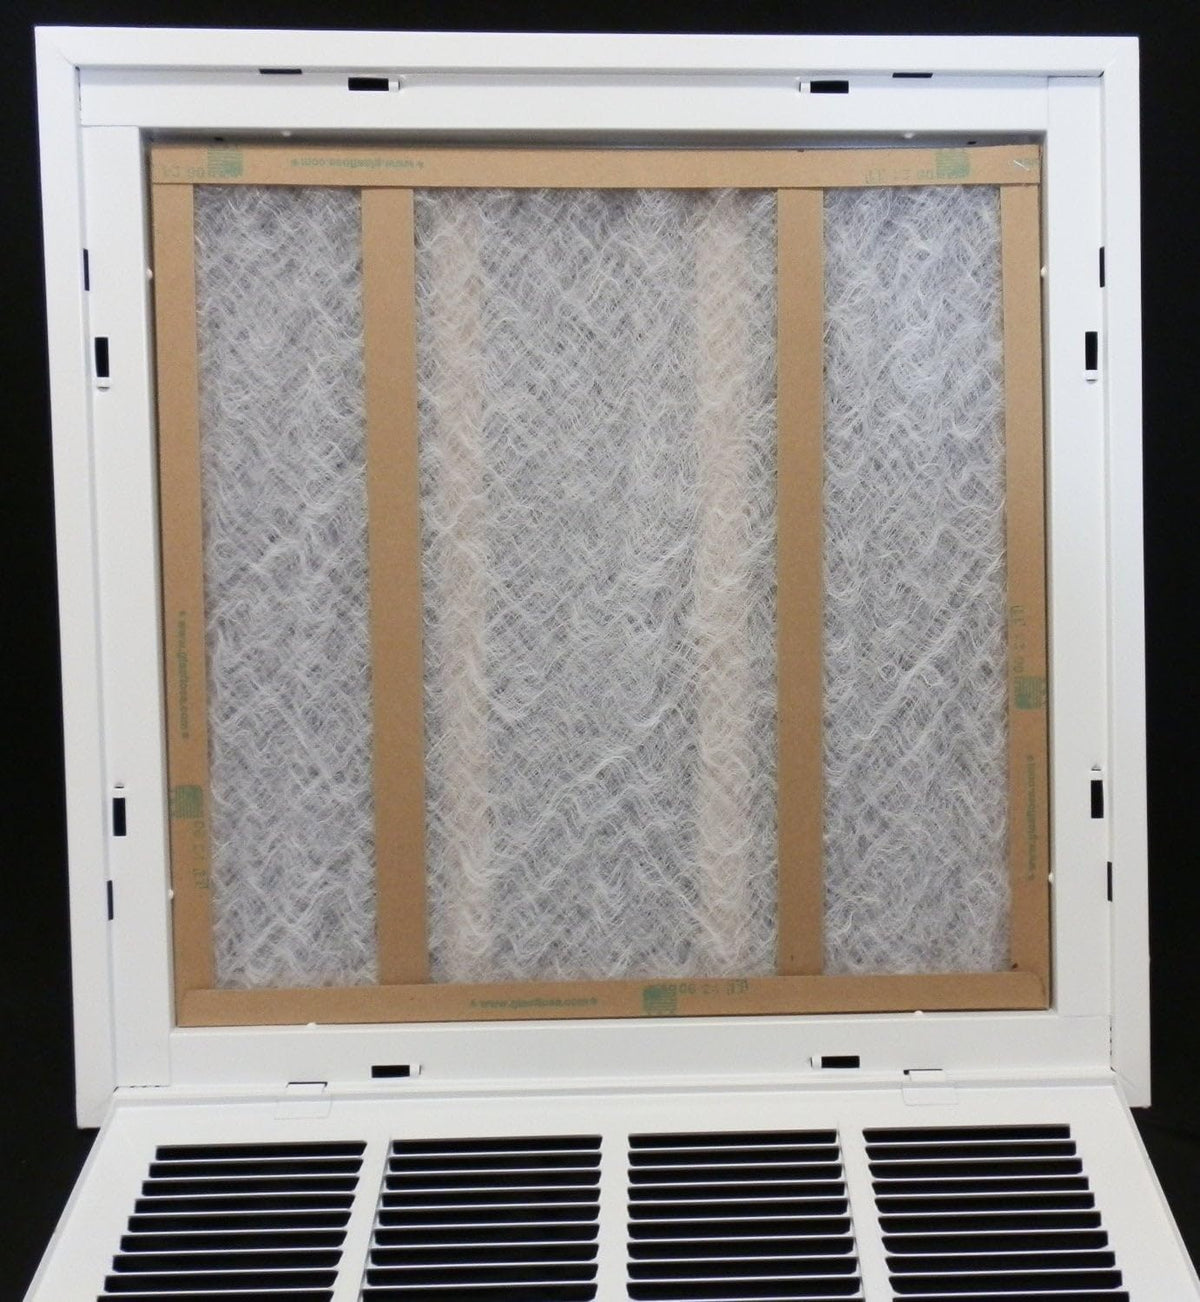 25&quot; X 10&quot; Steel Return Air Filter Grille for 1&quot; Filter - Removable Frame - [Outer Dimensions: 27 5/8&quot; X 12 5/8&quot;]